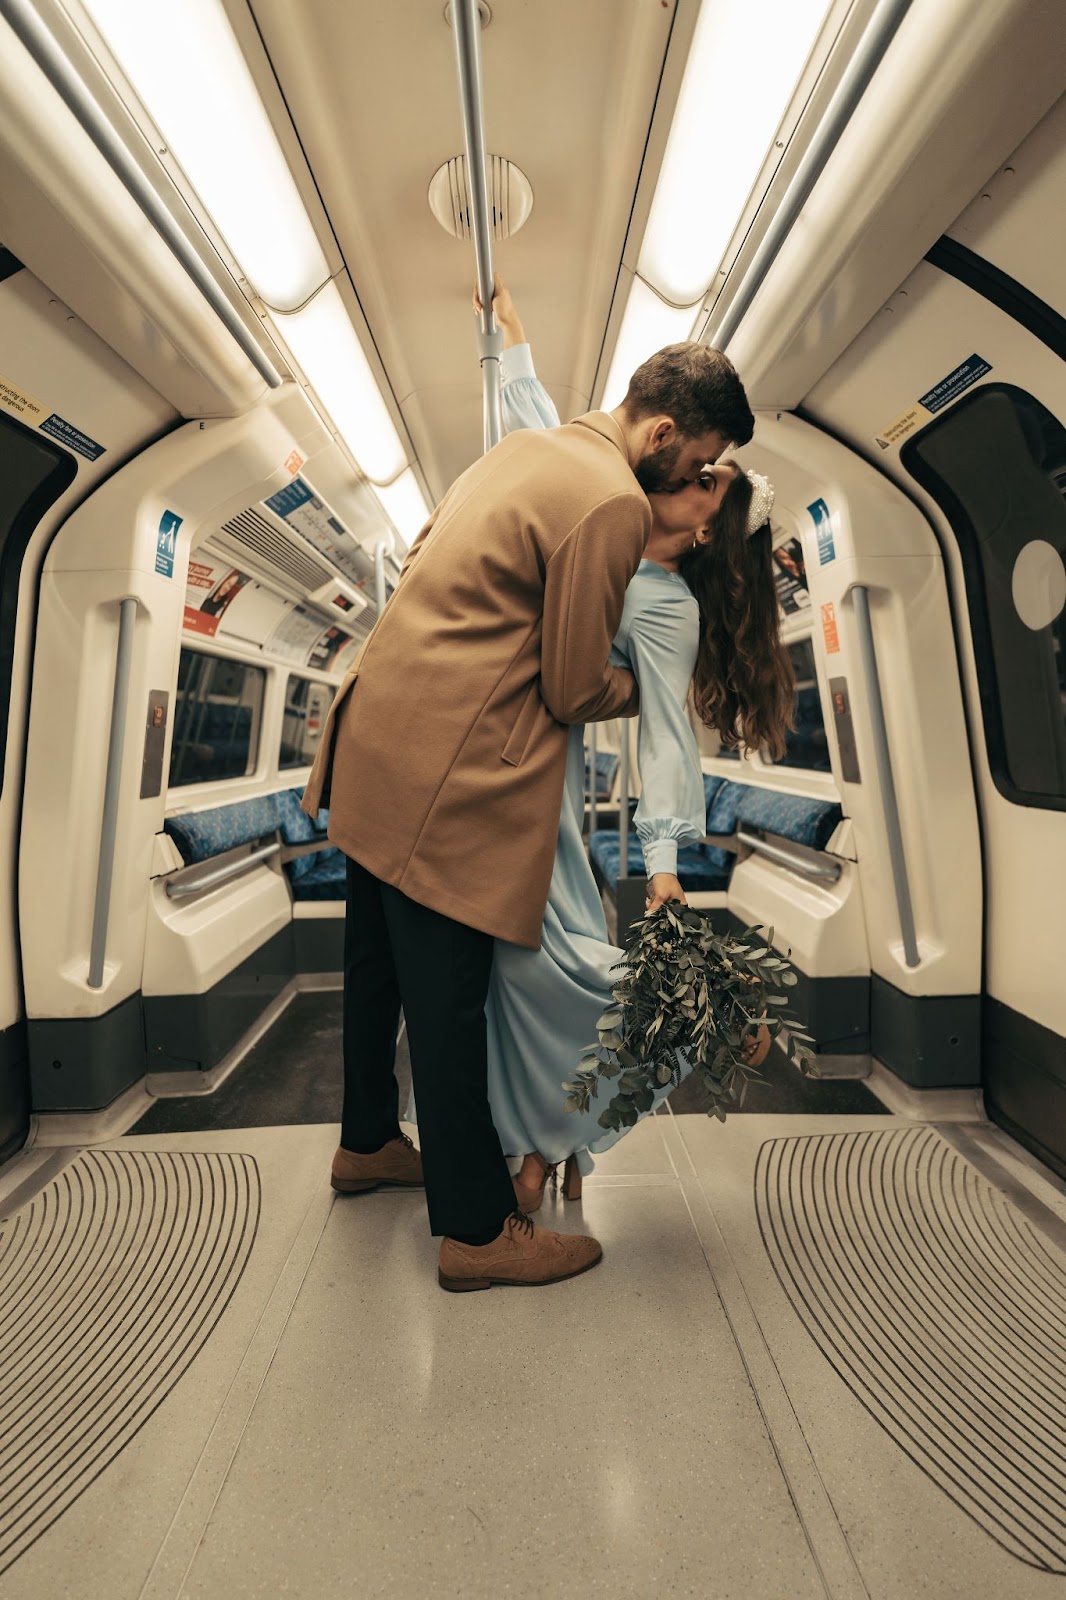 Bride and groom kissing on a London Underground train